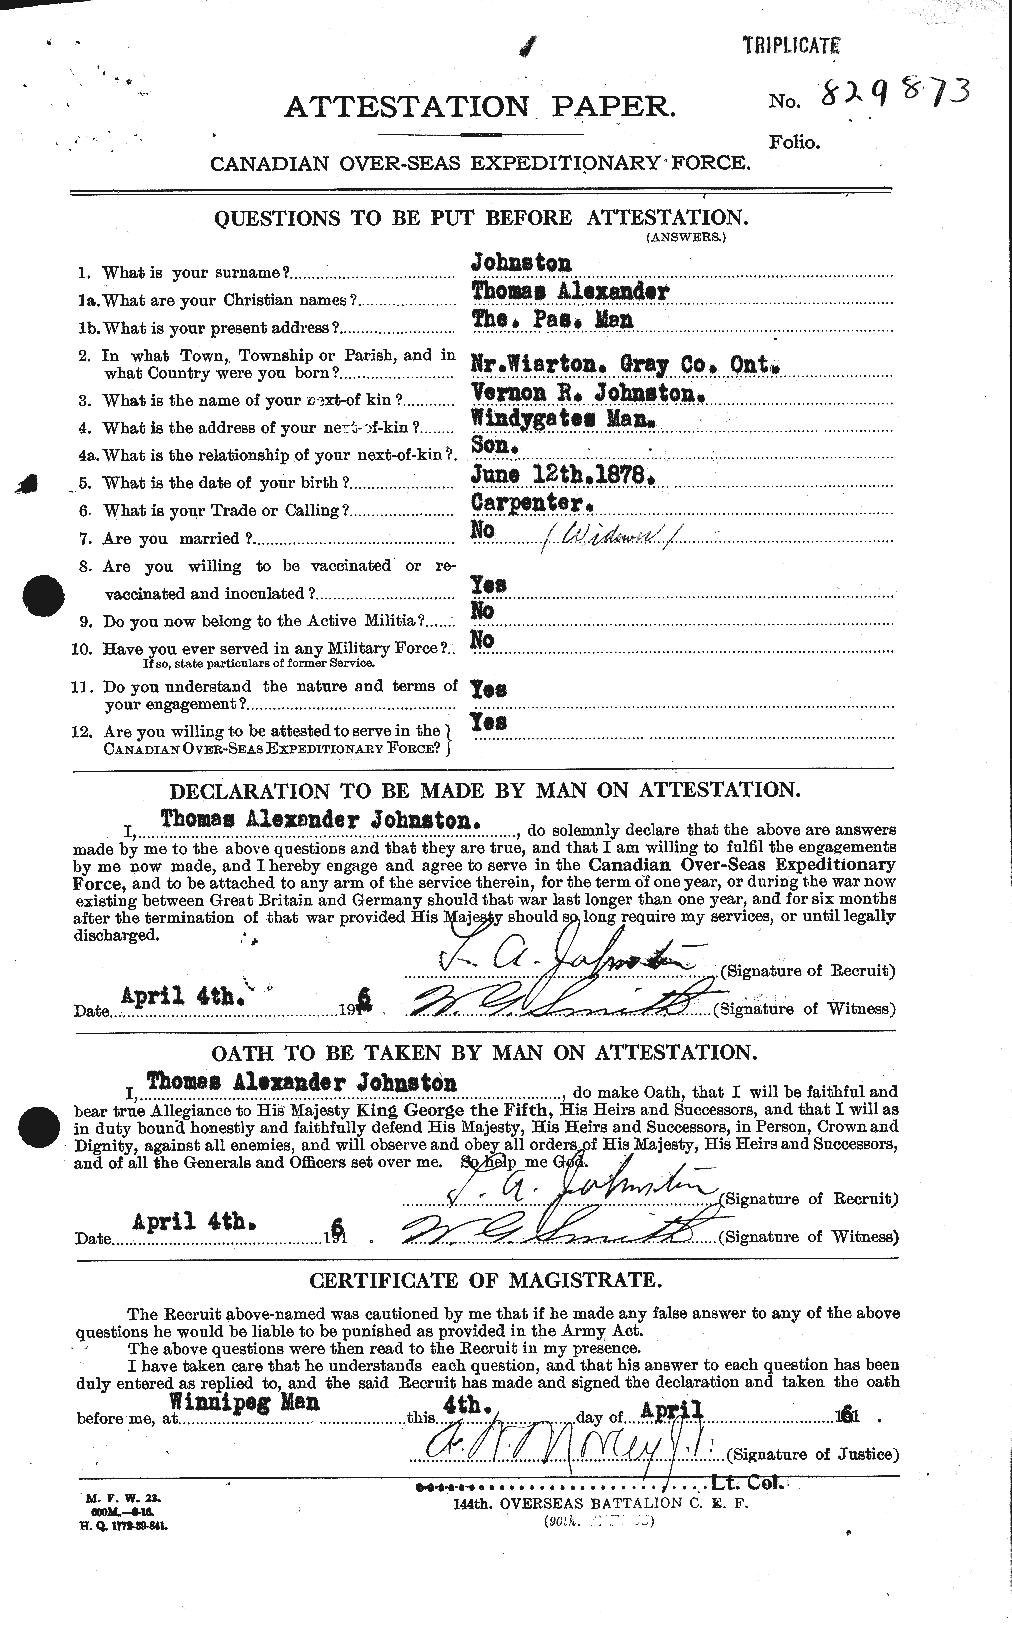 Personnel Records of the First World War - CEF 427149a